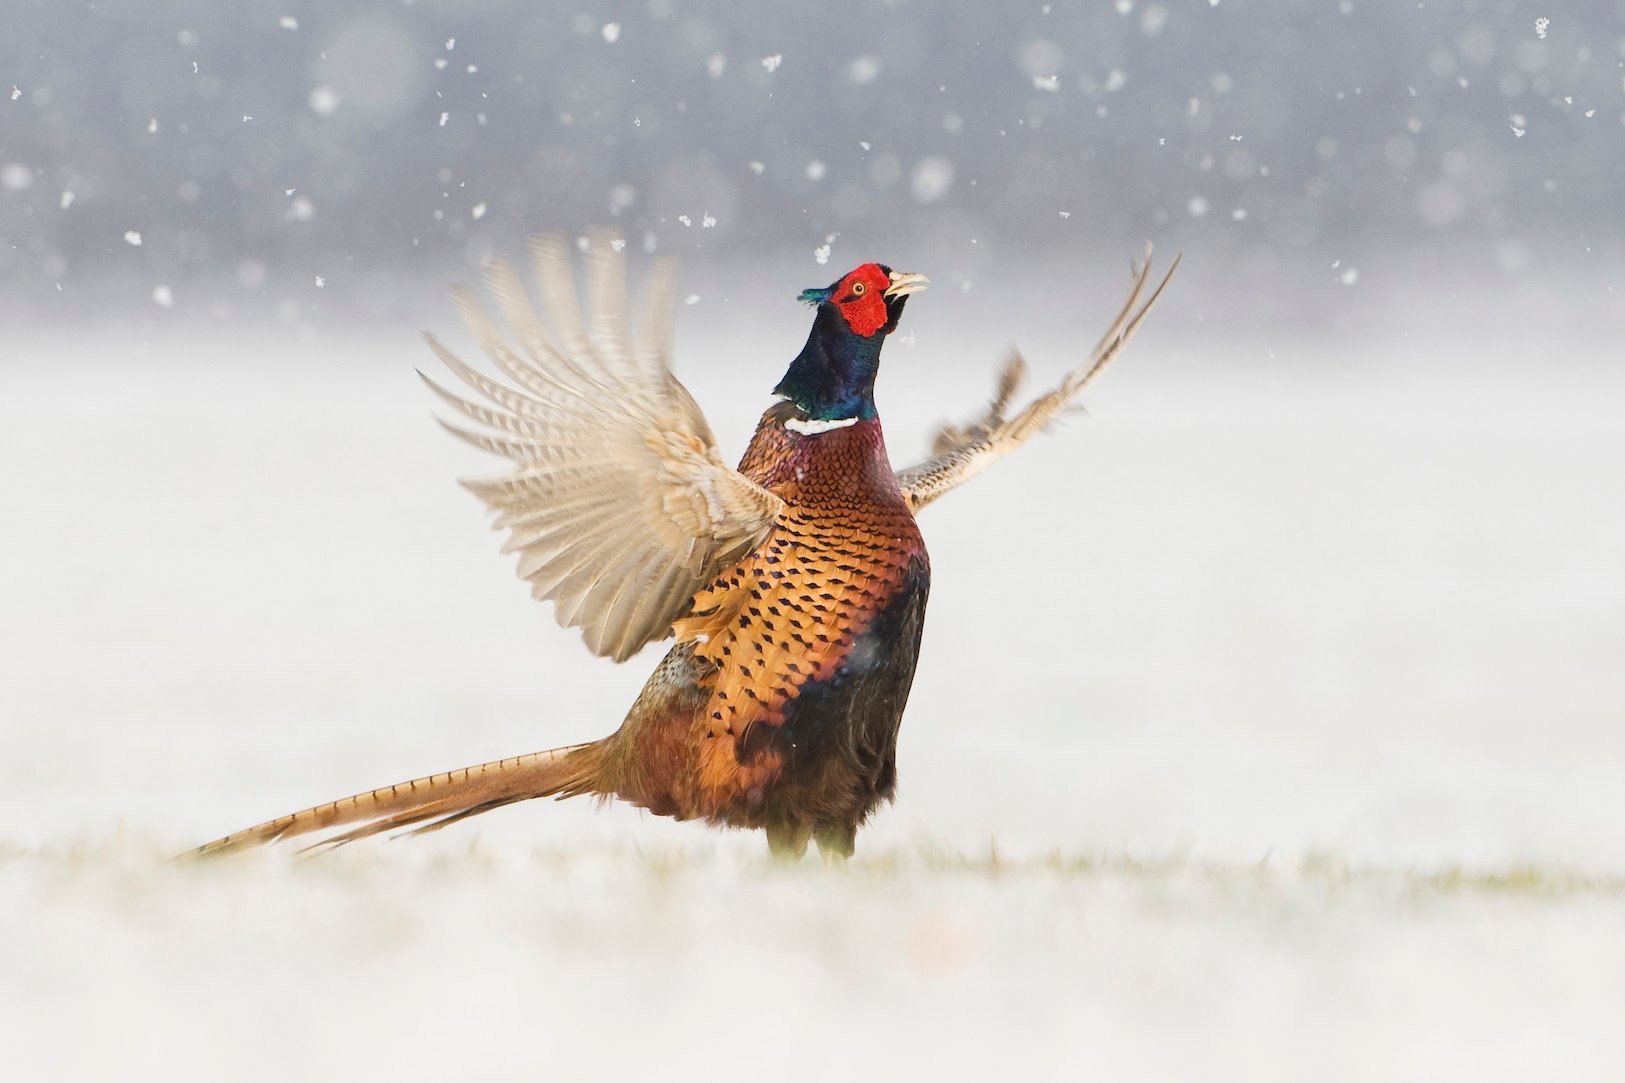 Pheasant Phasinaus colchicus adult male displaying in falling snow. Scotland. March